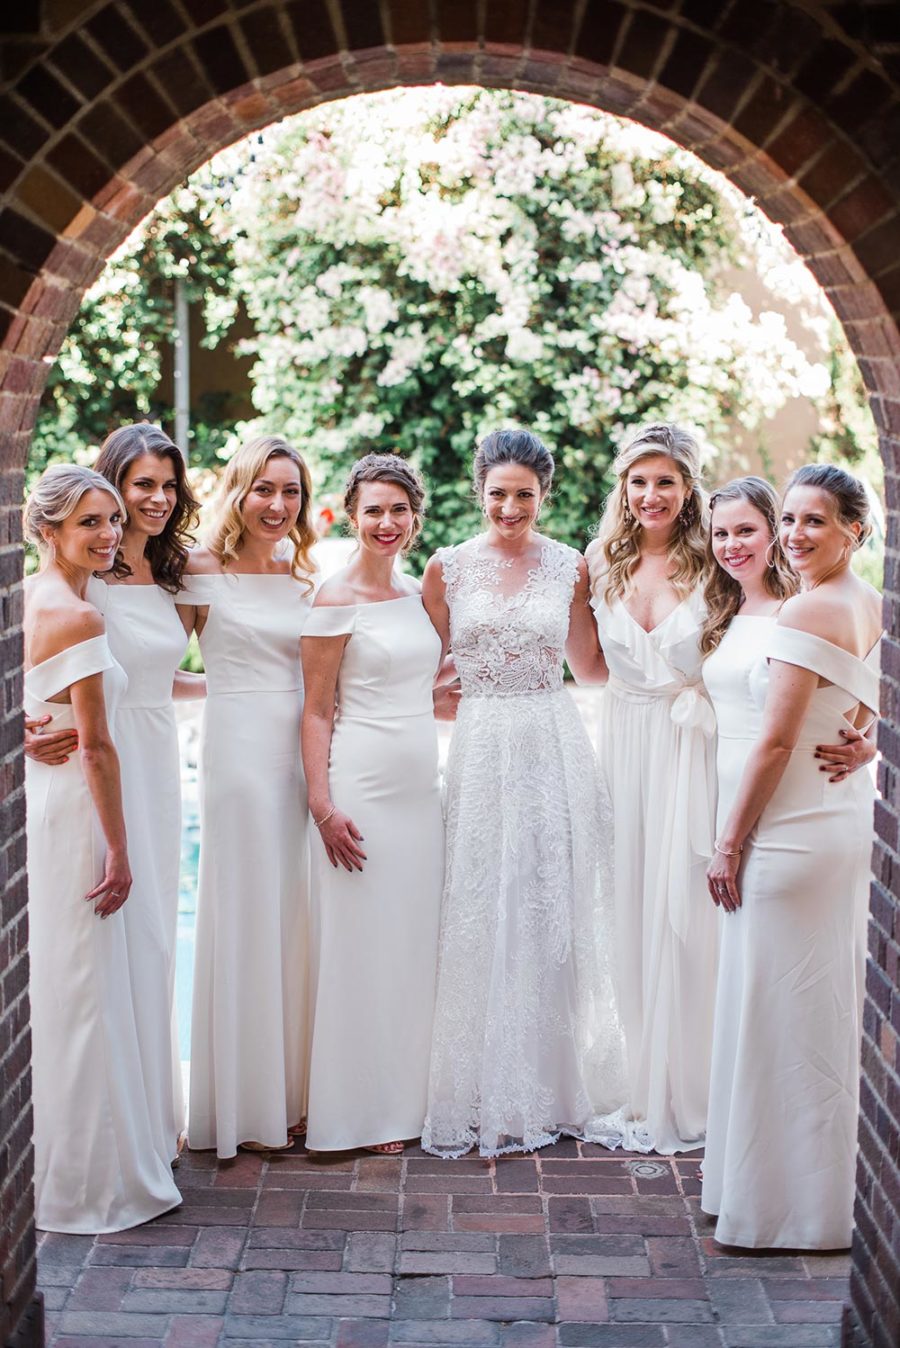 32 All White Bridesmaid Dresses That Are Totally Slaying the Game ⋆ Ruffled